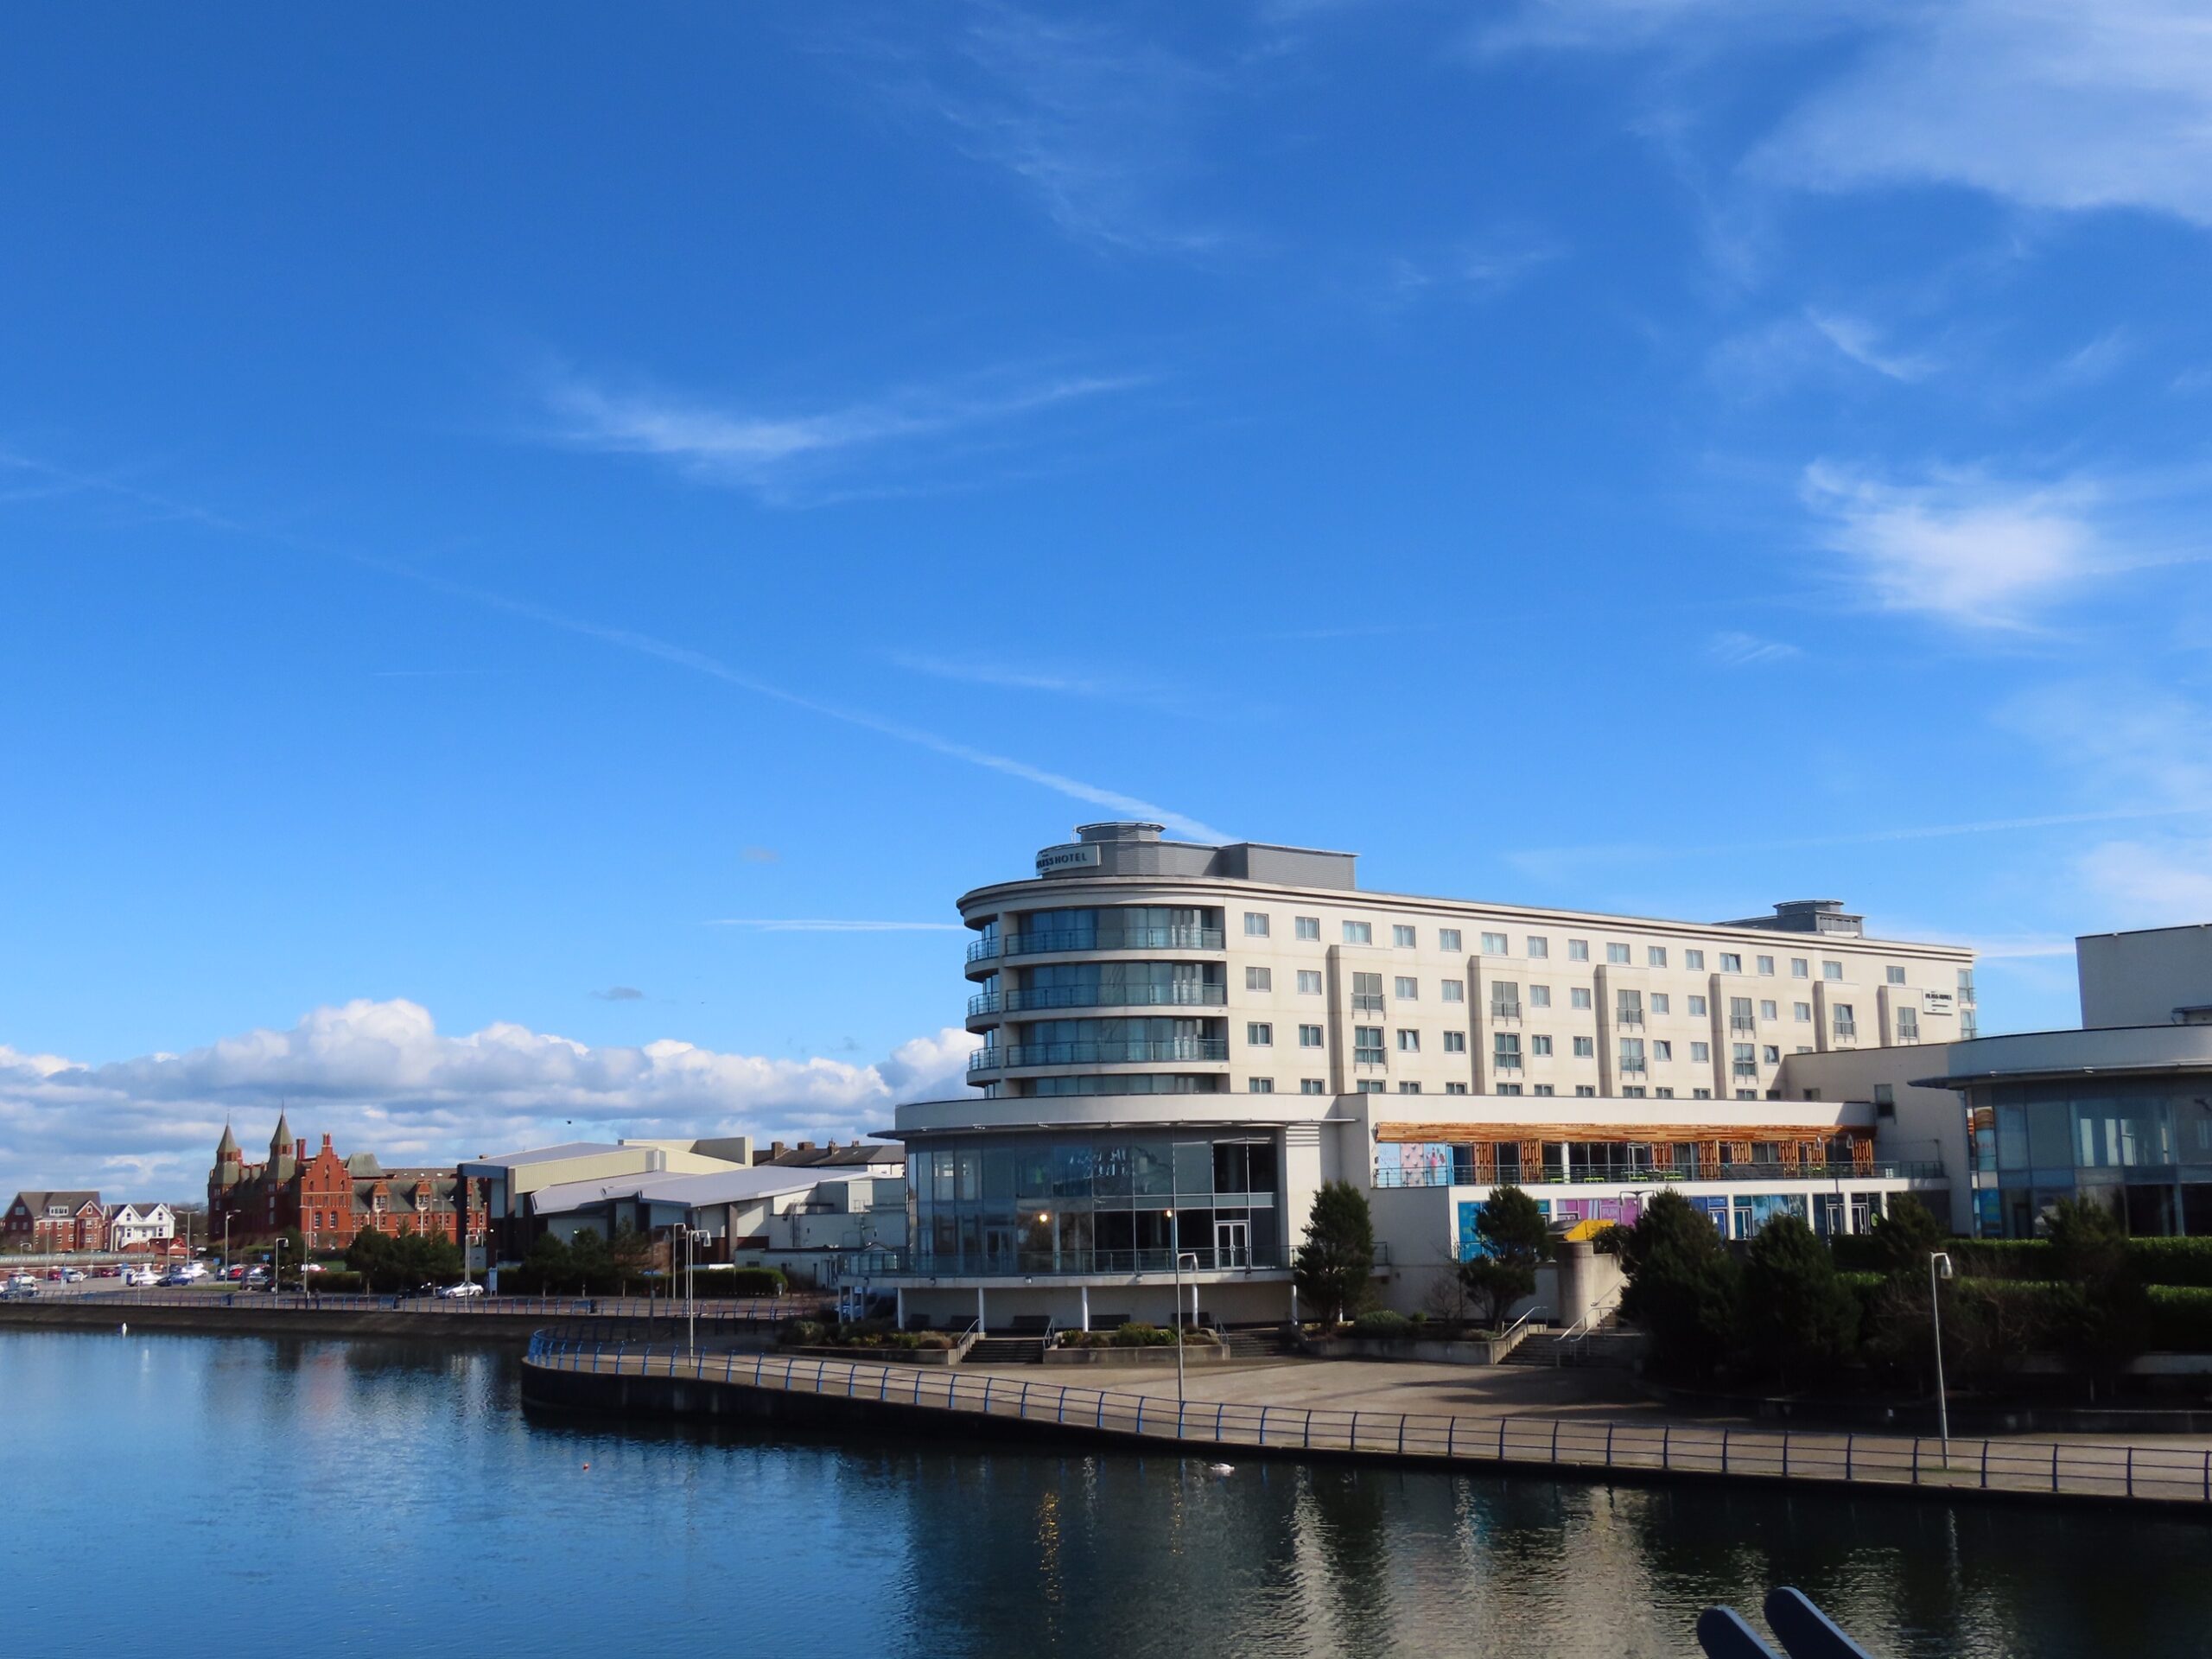 Bliss Hotel in Southport. Photo by Andrew Brown Media